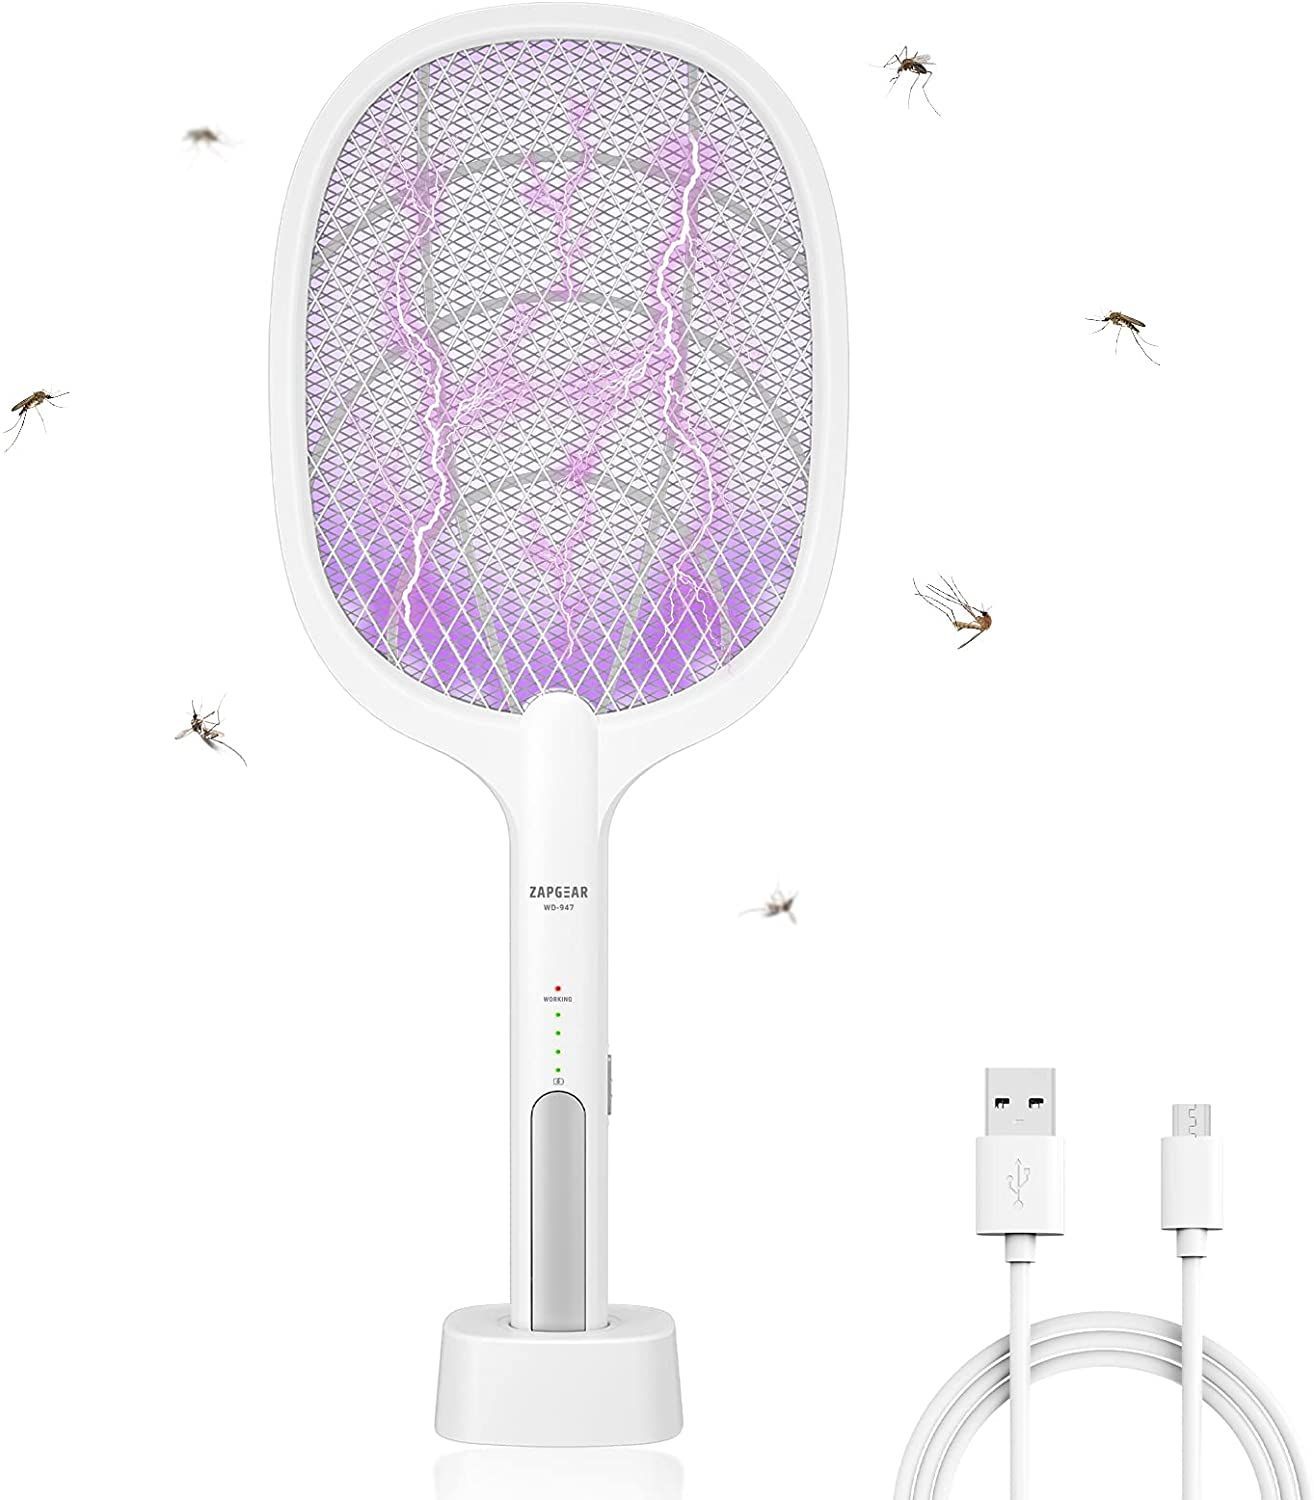 Green USB Rechargeable Electric Mosquito Fly Gnat Killer for Home Indoor Outdoor Endbug Bug Zapper Lamp & Fly Swatter Racket 2 in 1 